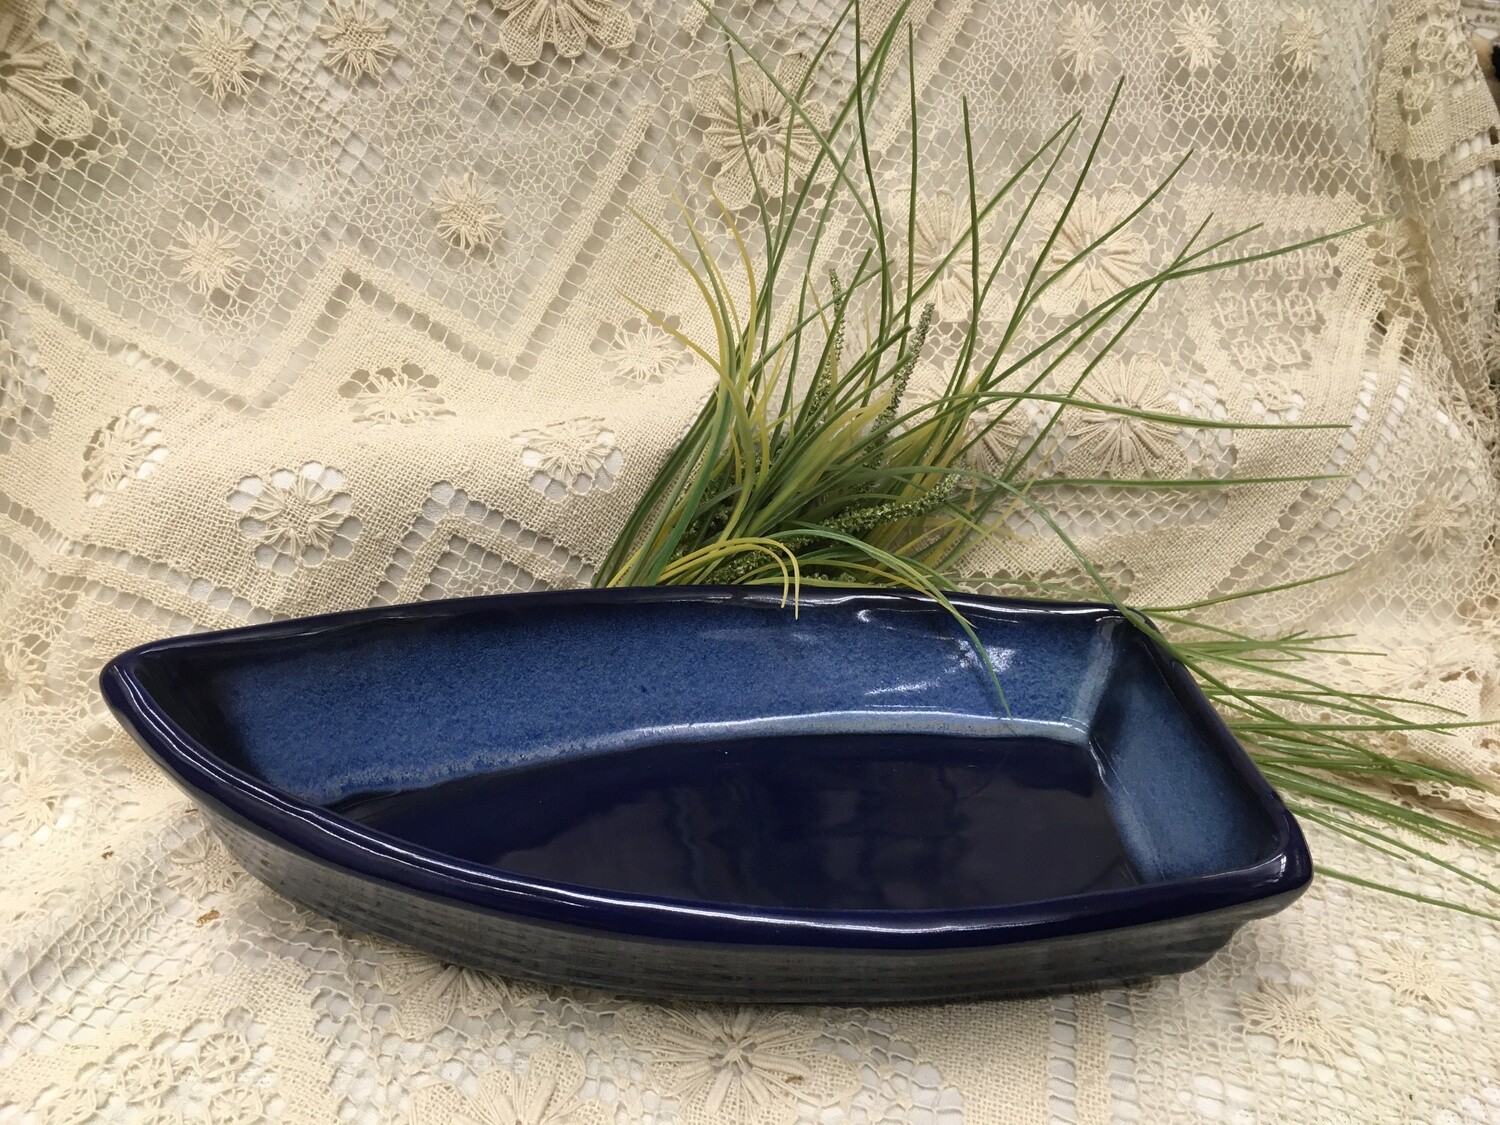 Boat Baker Northern Lights Blue - Maxwell Pottery - Handcrafted Canadian